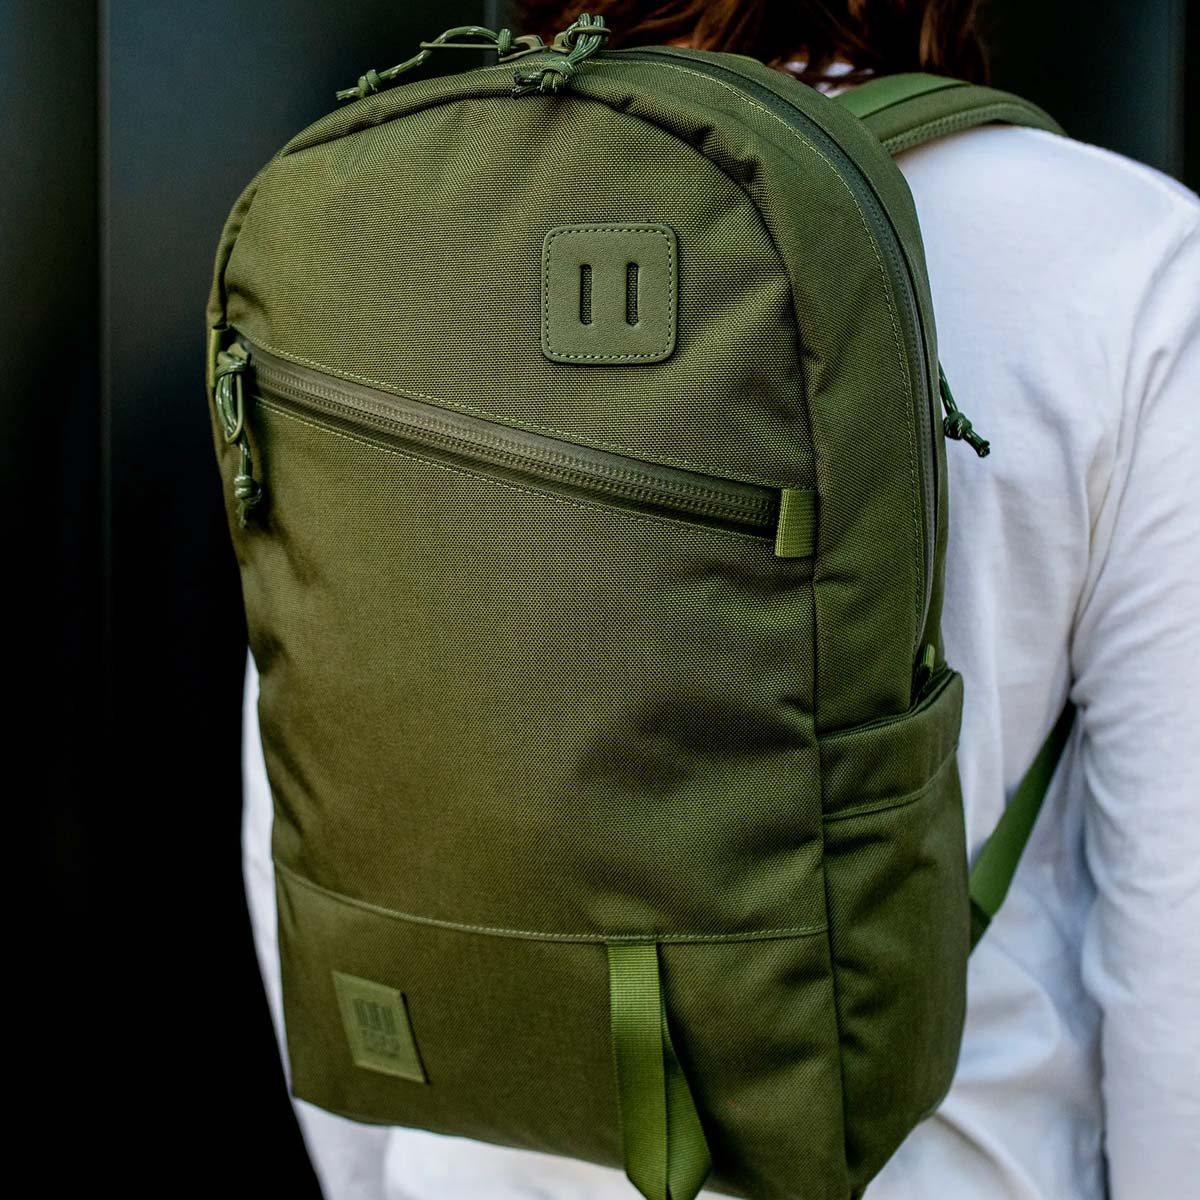 Topo Designs Daypack Tech Charcoal, it’s great as an everyday work bag, yet it has enough room for extra layers on the trail